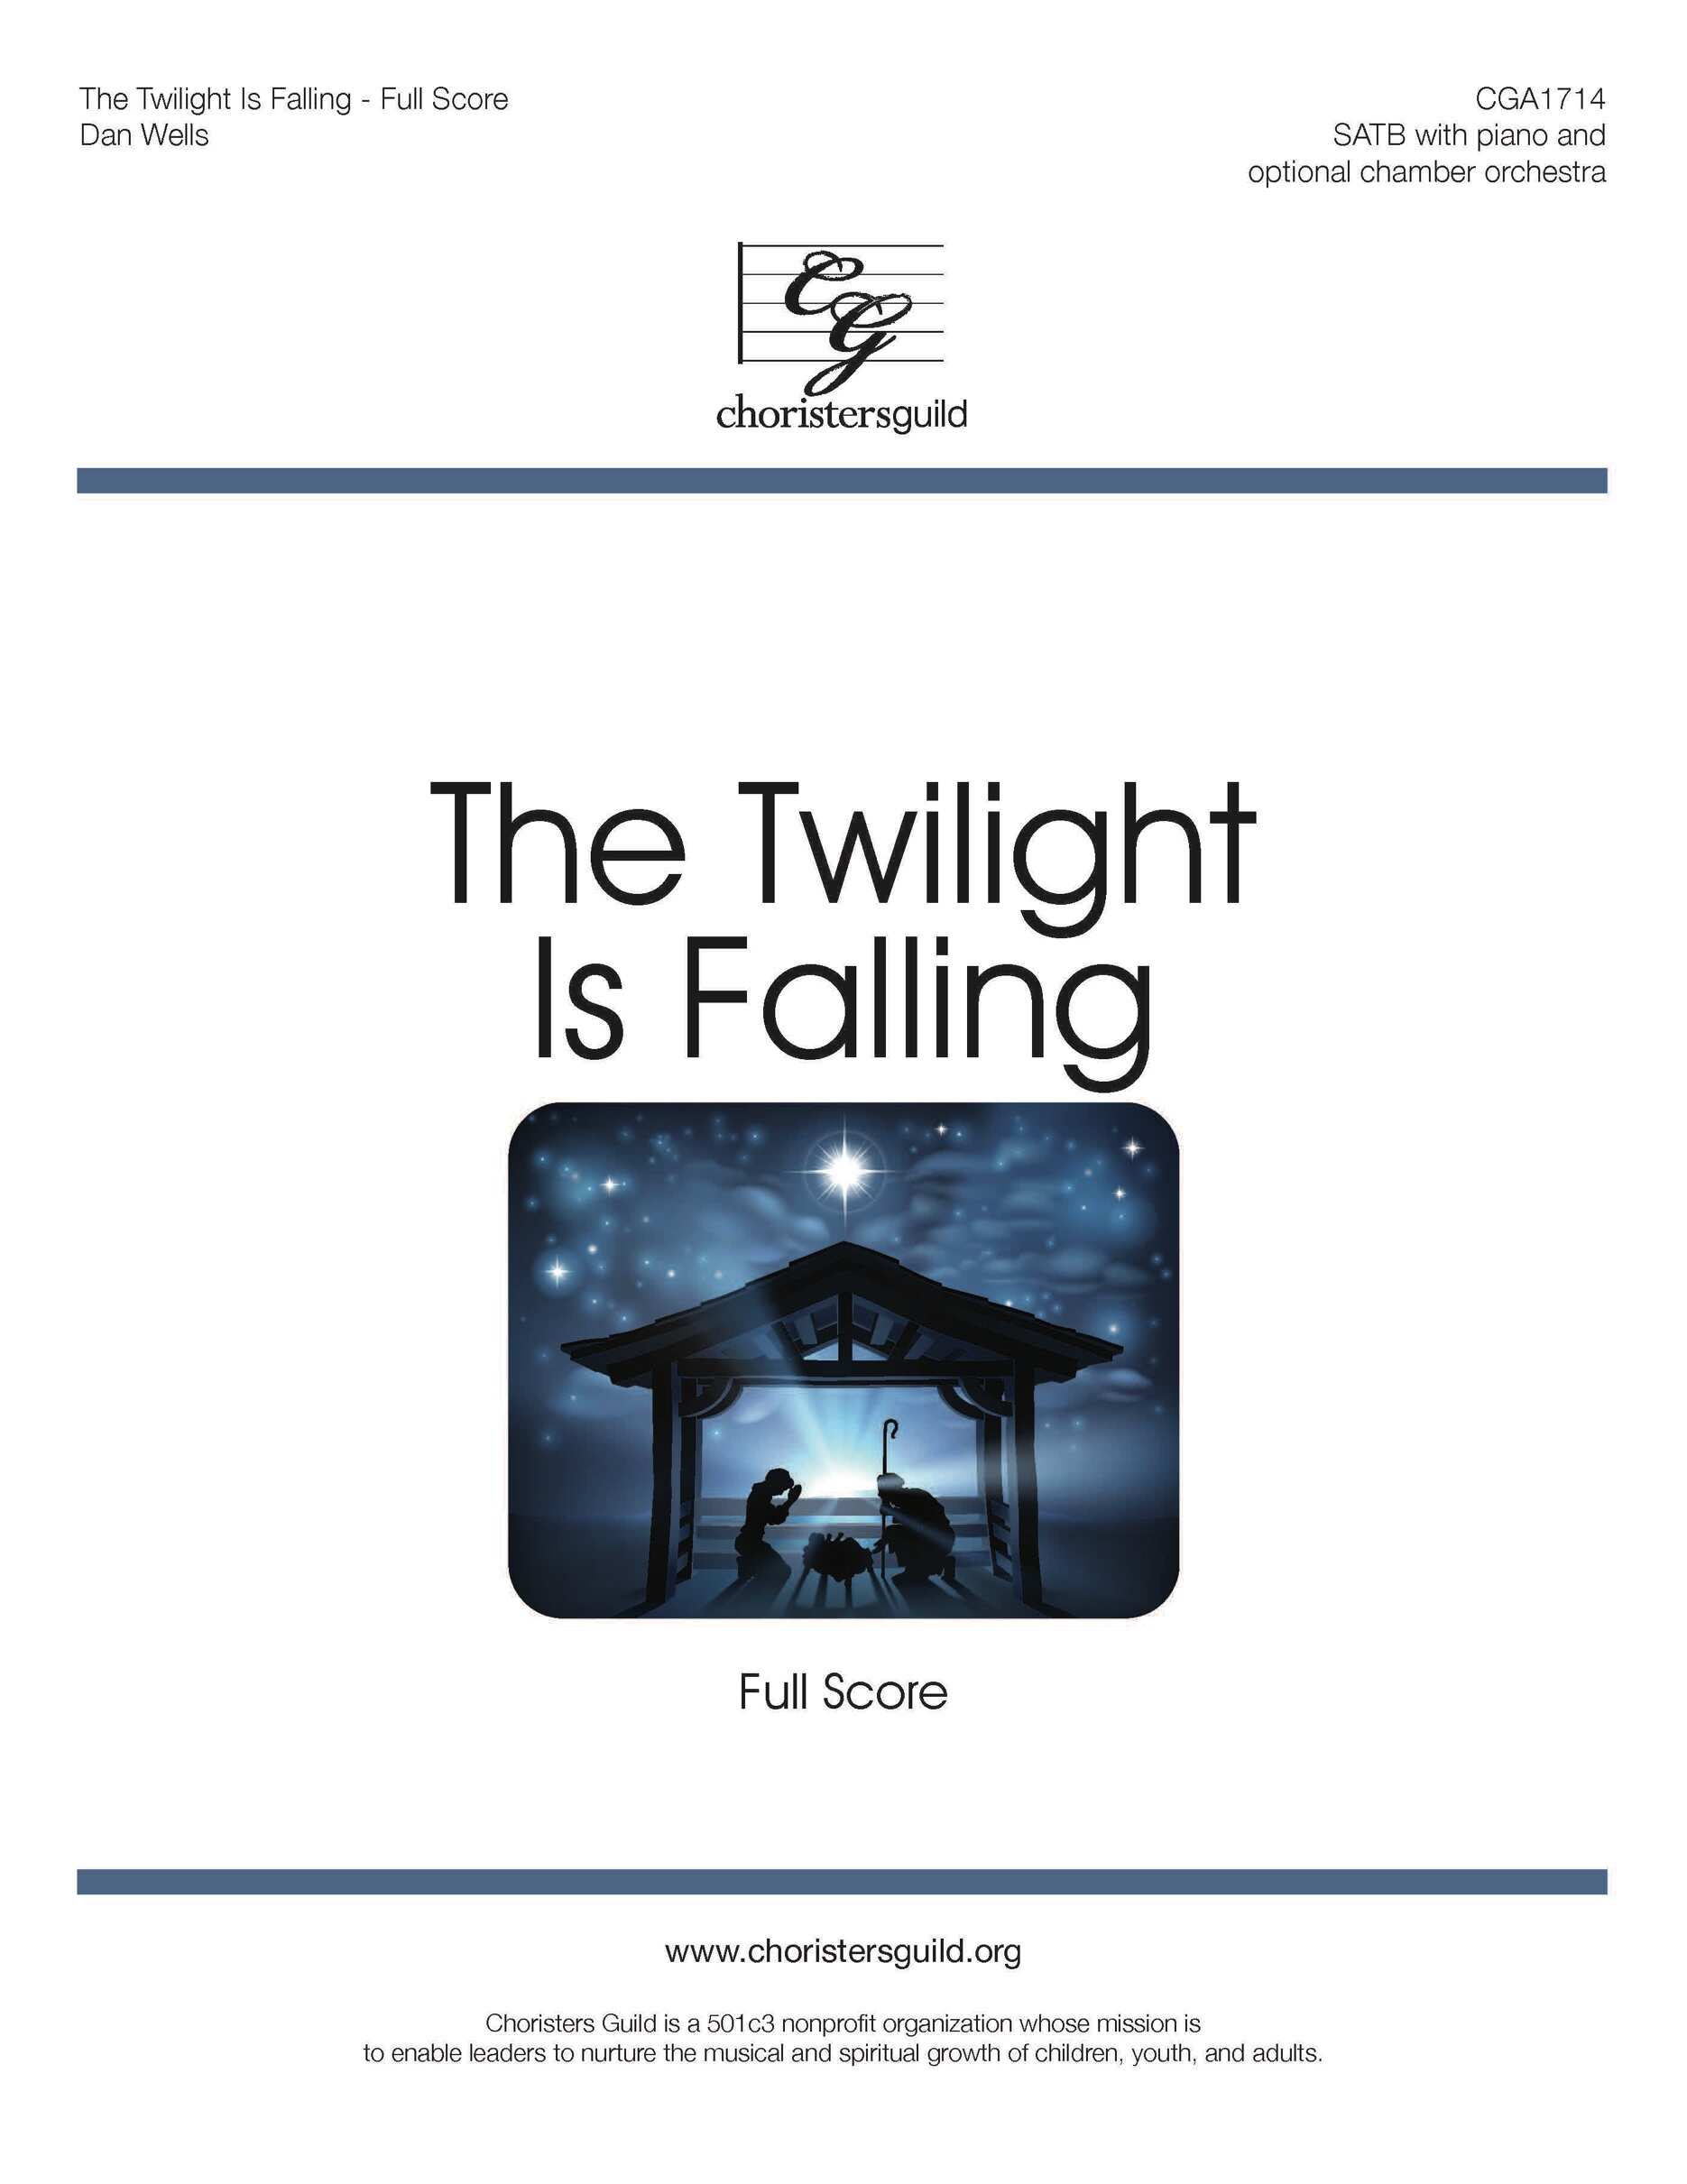 The Twilight Is Falling - Full Score and Reproducible Instrumental Parts